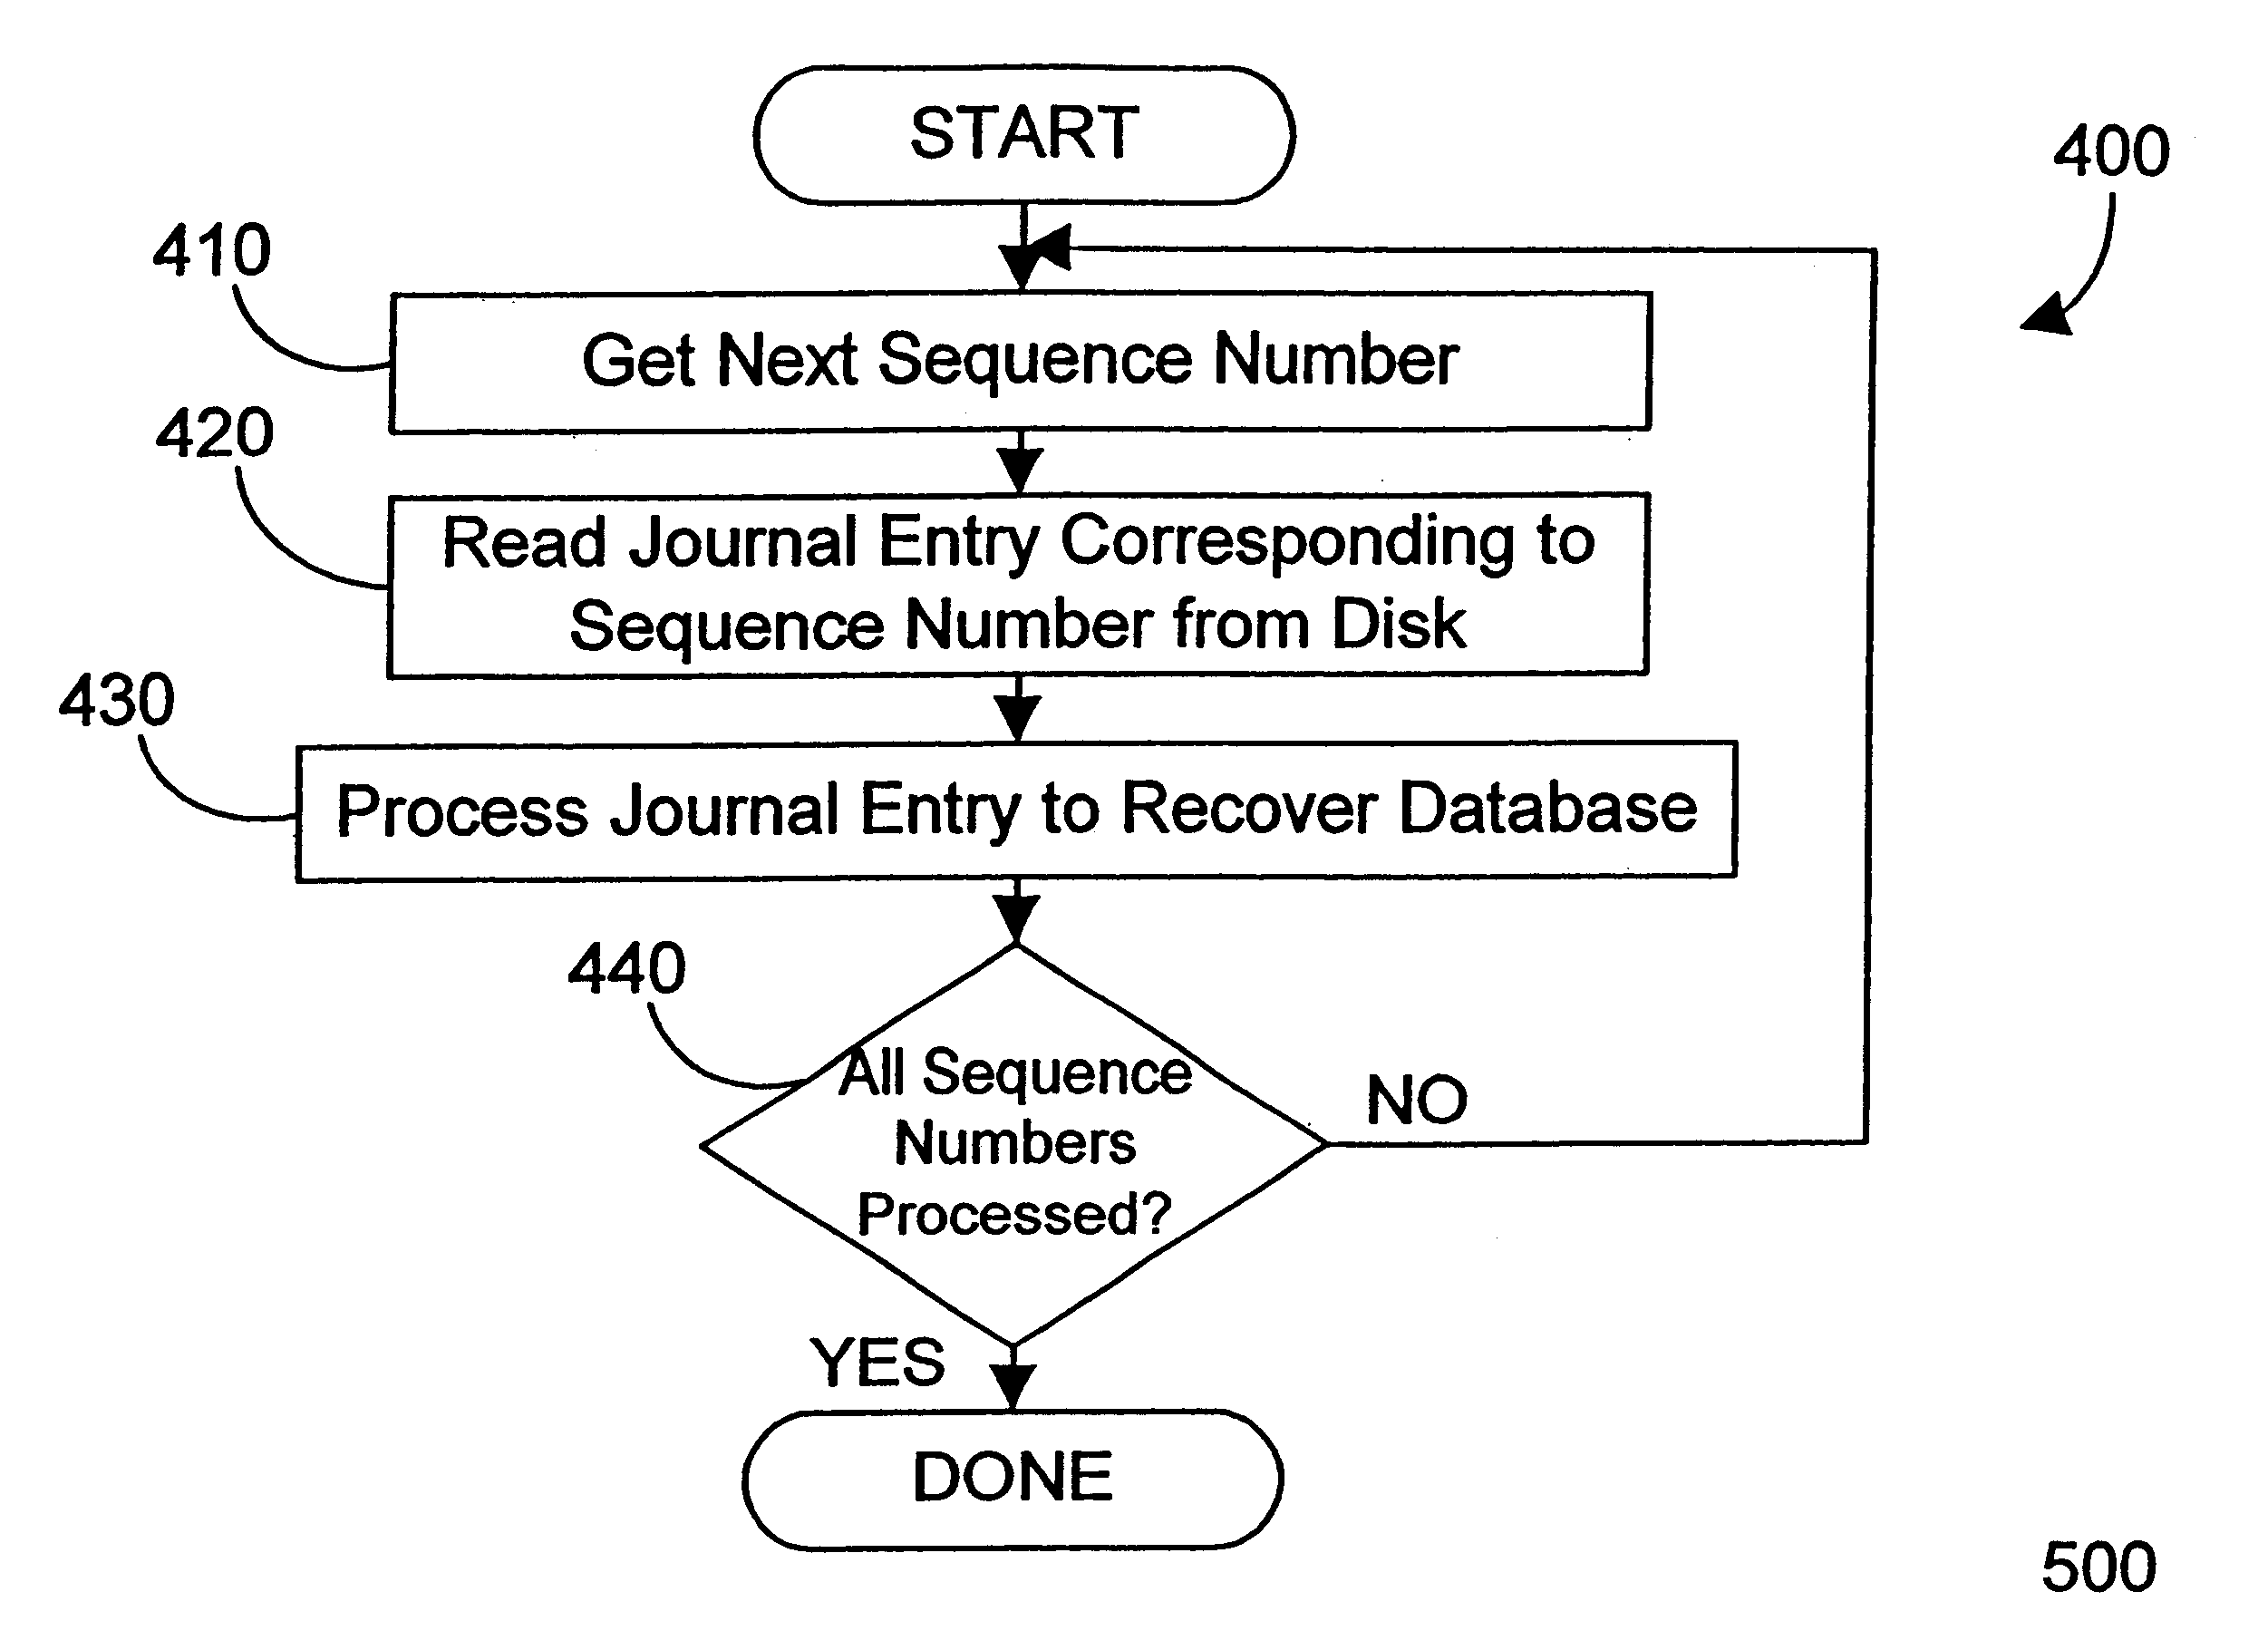 Database journal mechanism and method that supports multiple simultaneous deposits